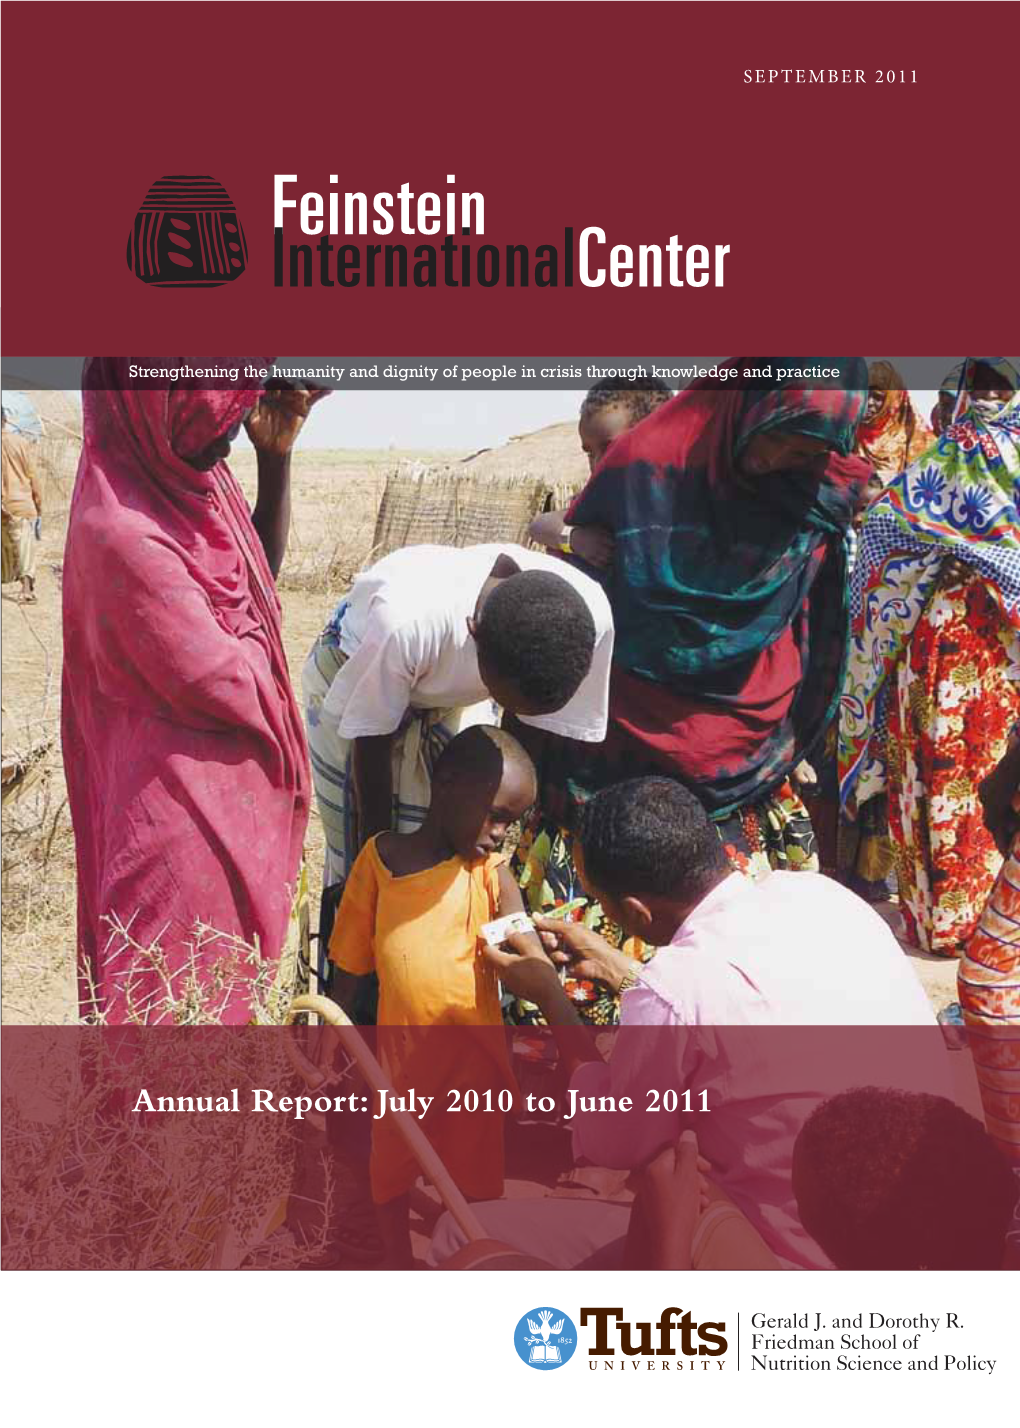 Annual Report: July 2010 to June 2011